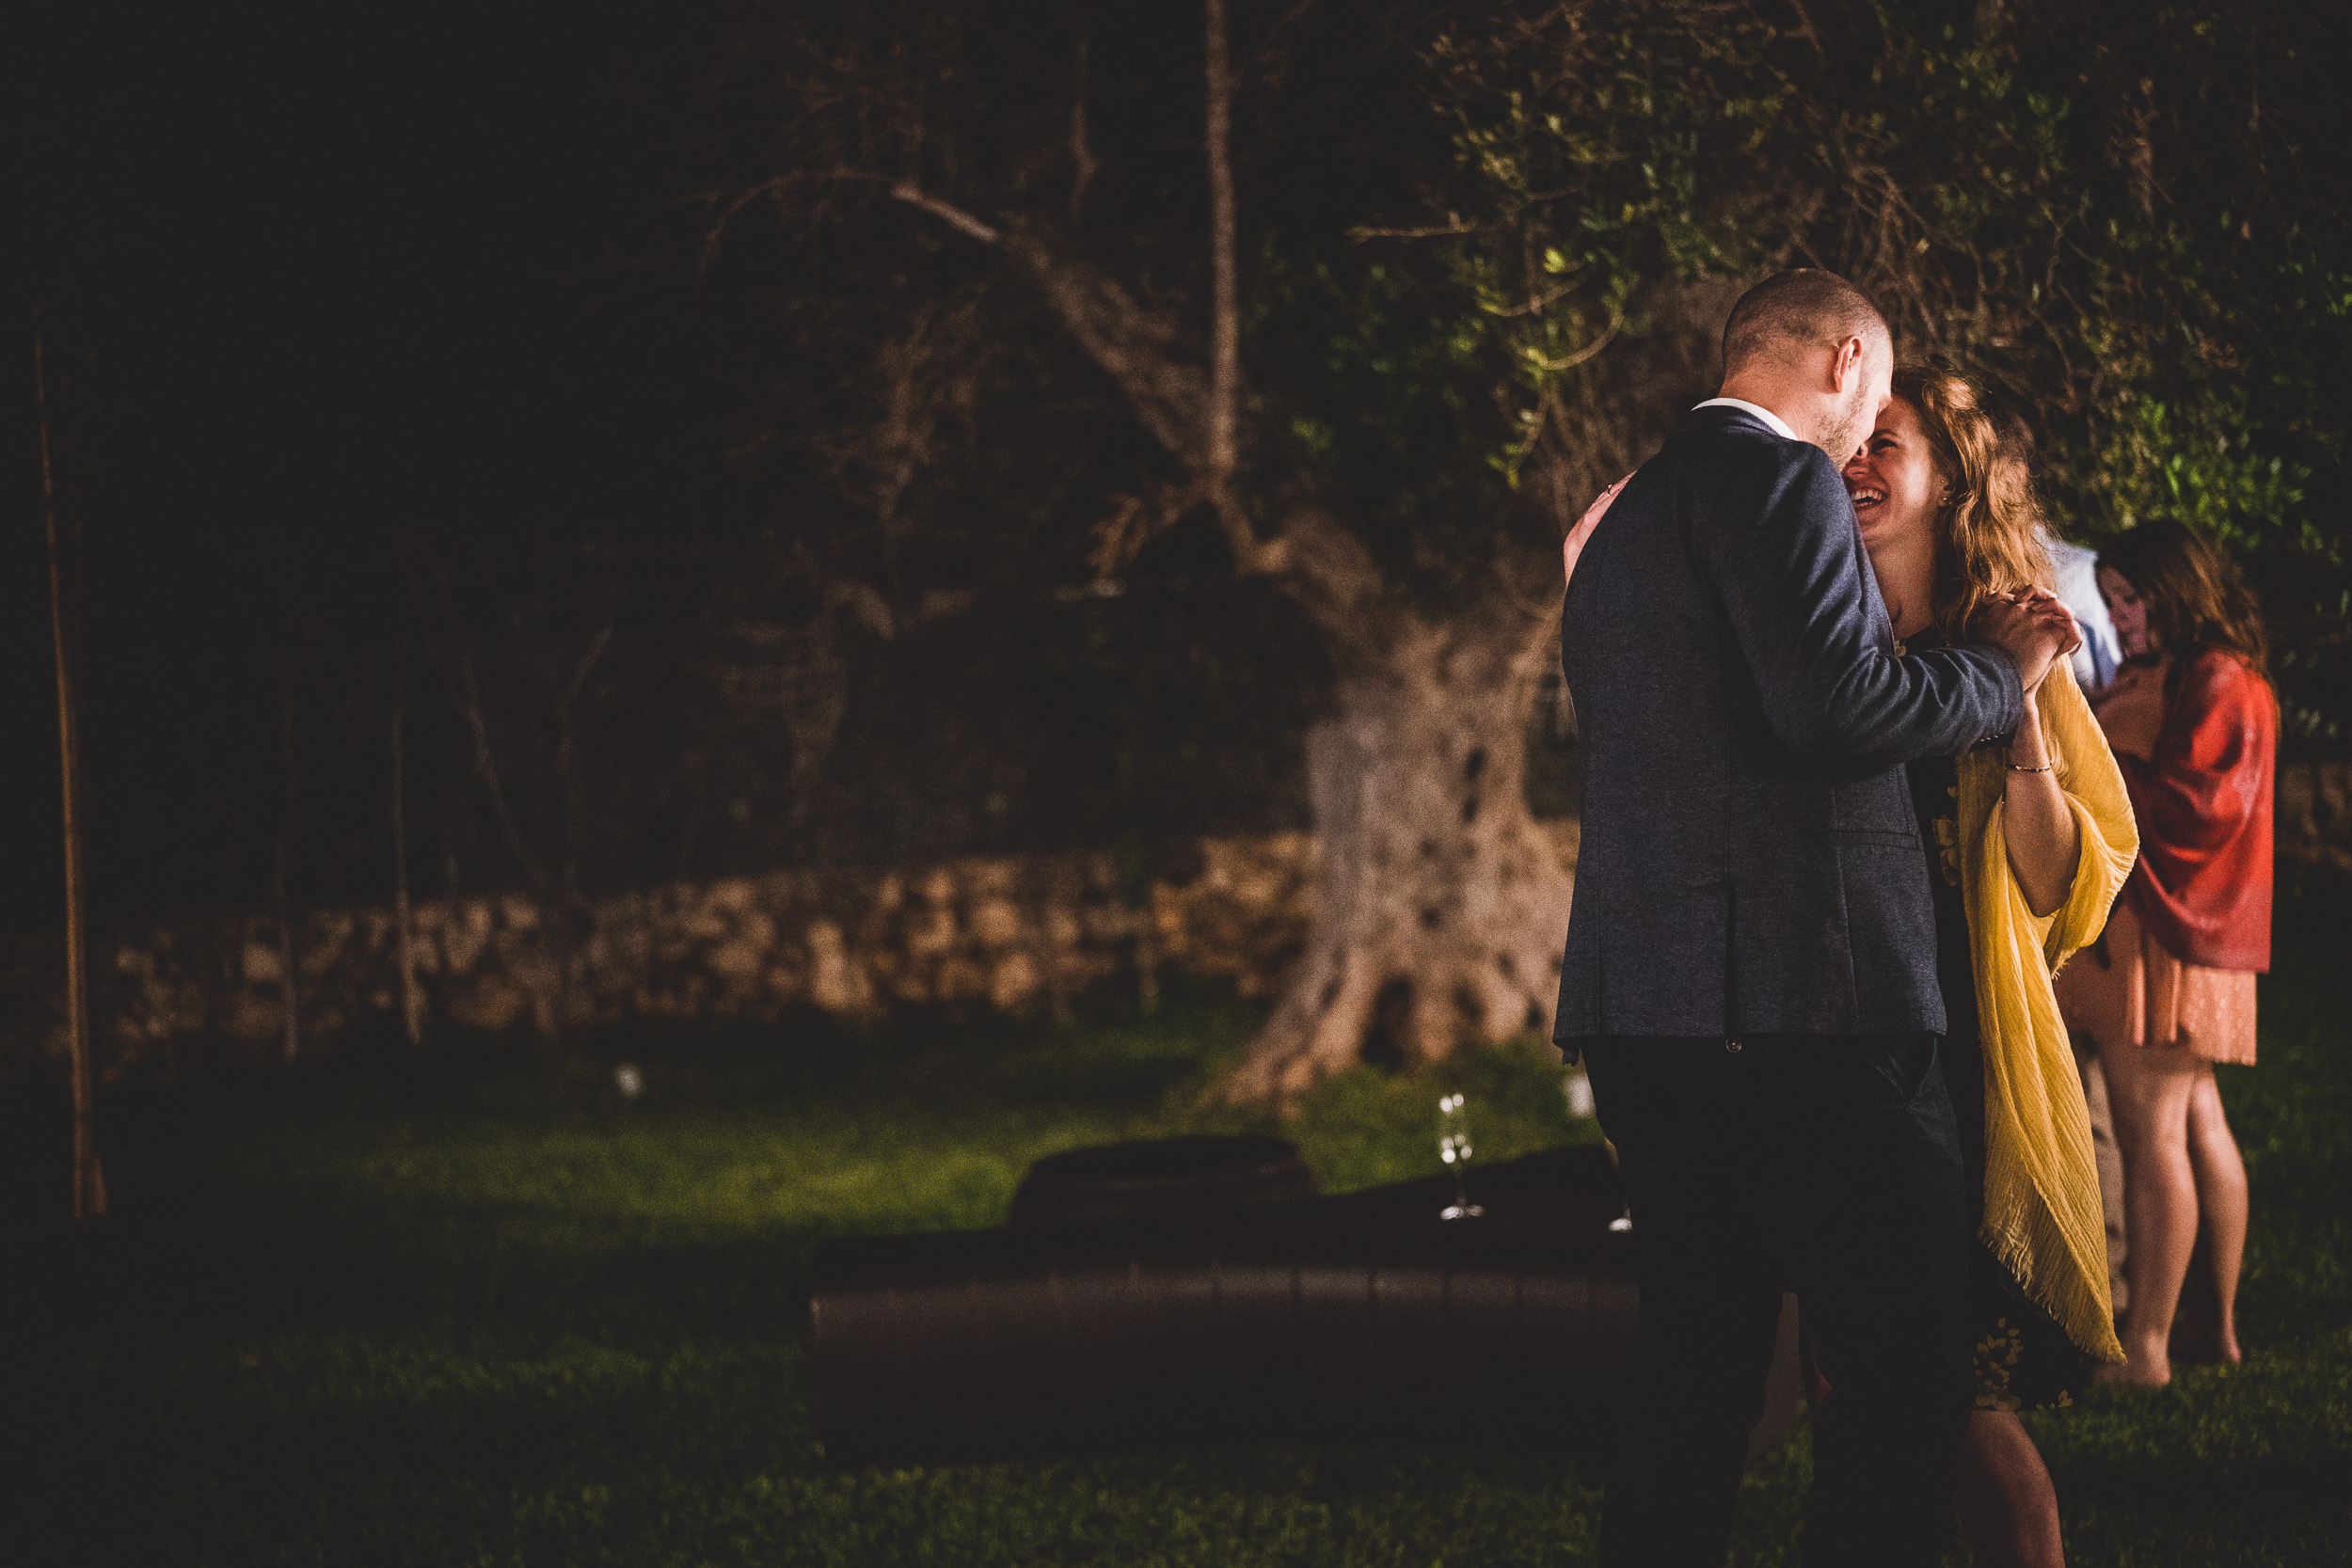 A wedding photographer captures a bride and groom kissing under a tree during their night-time wedding.